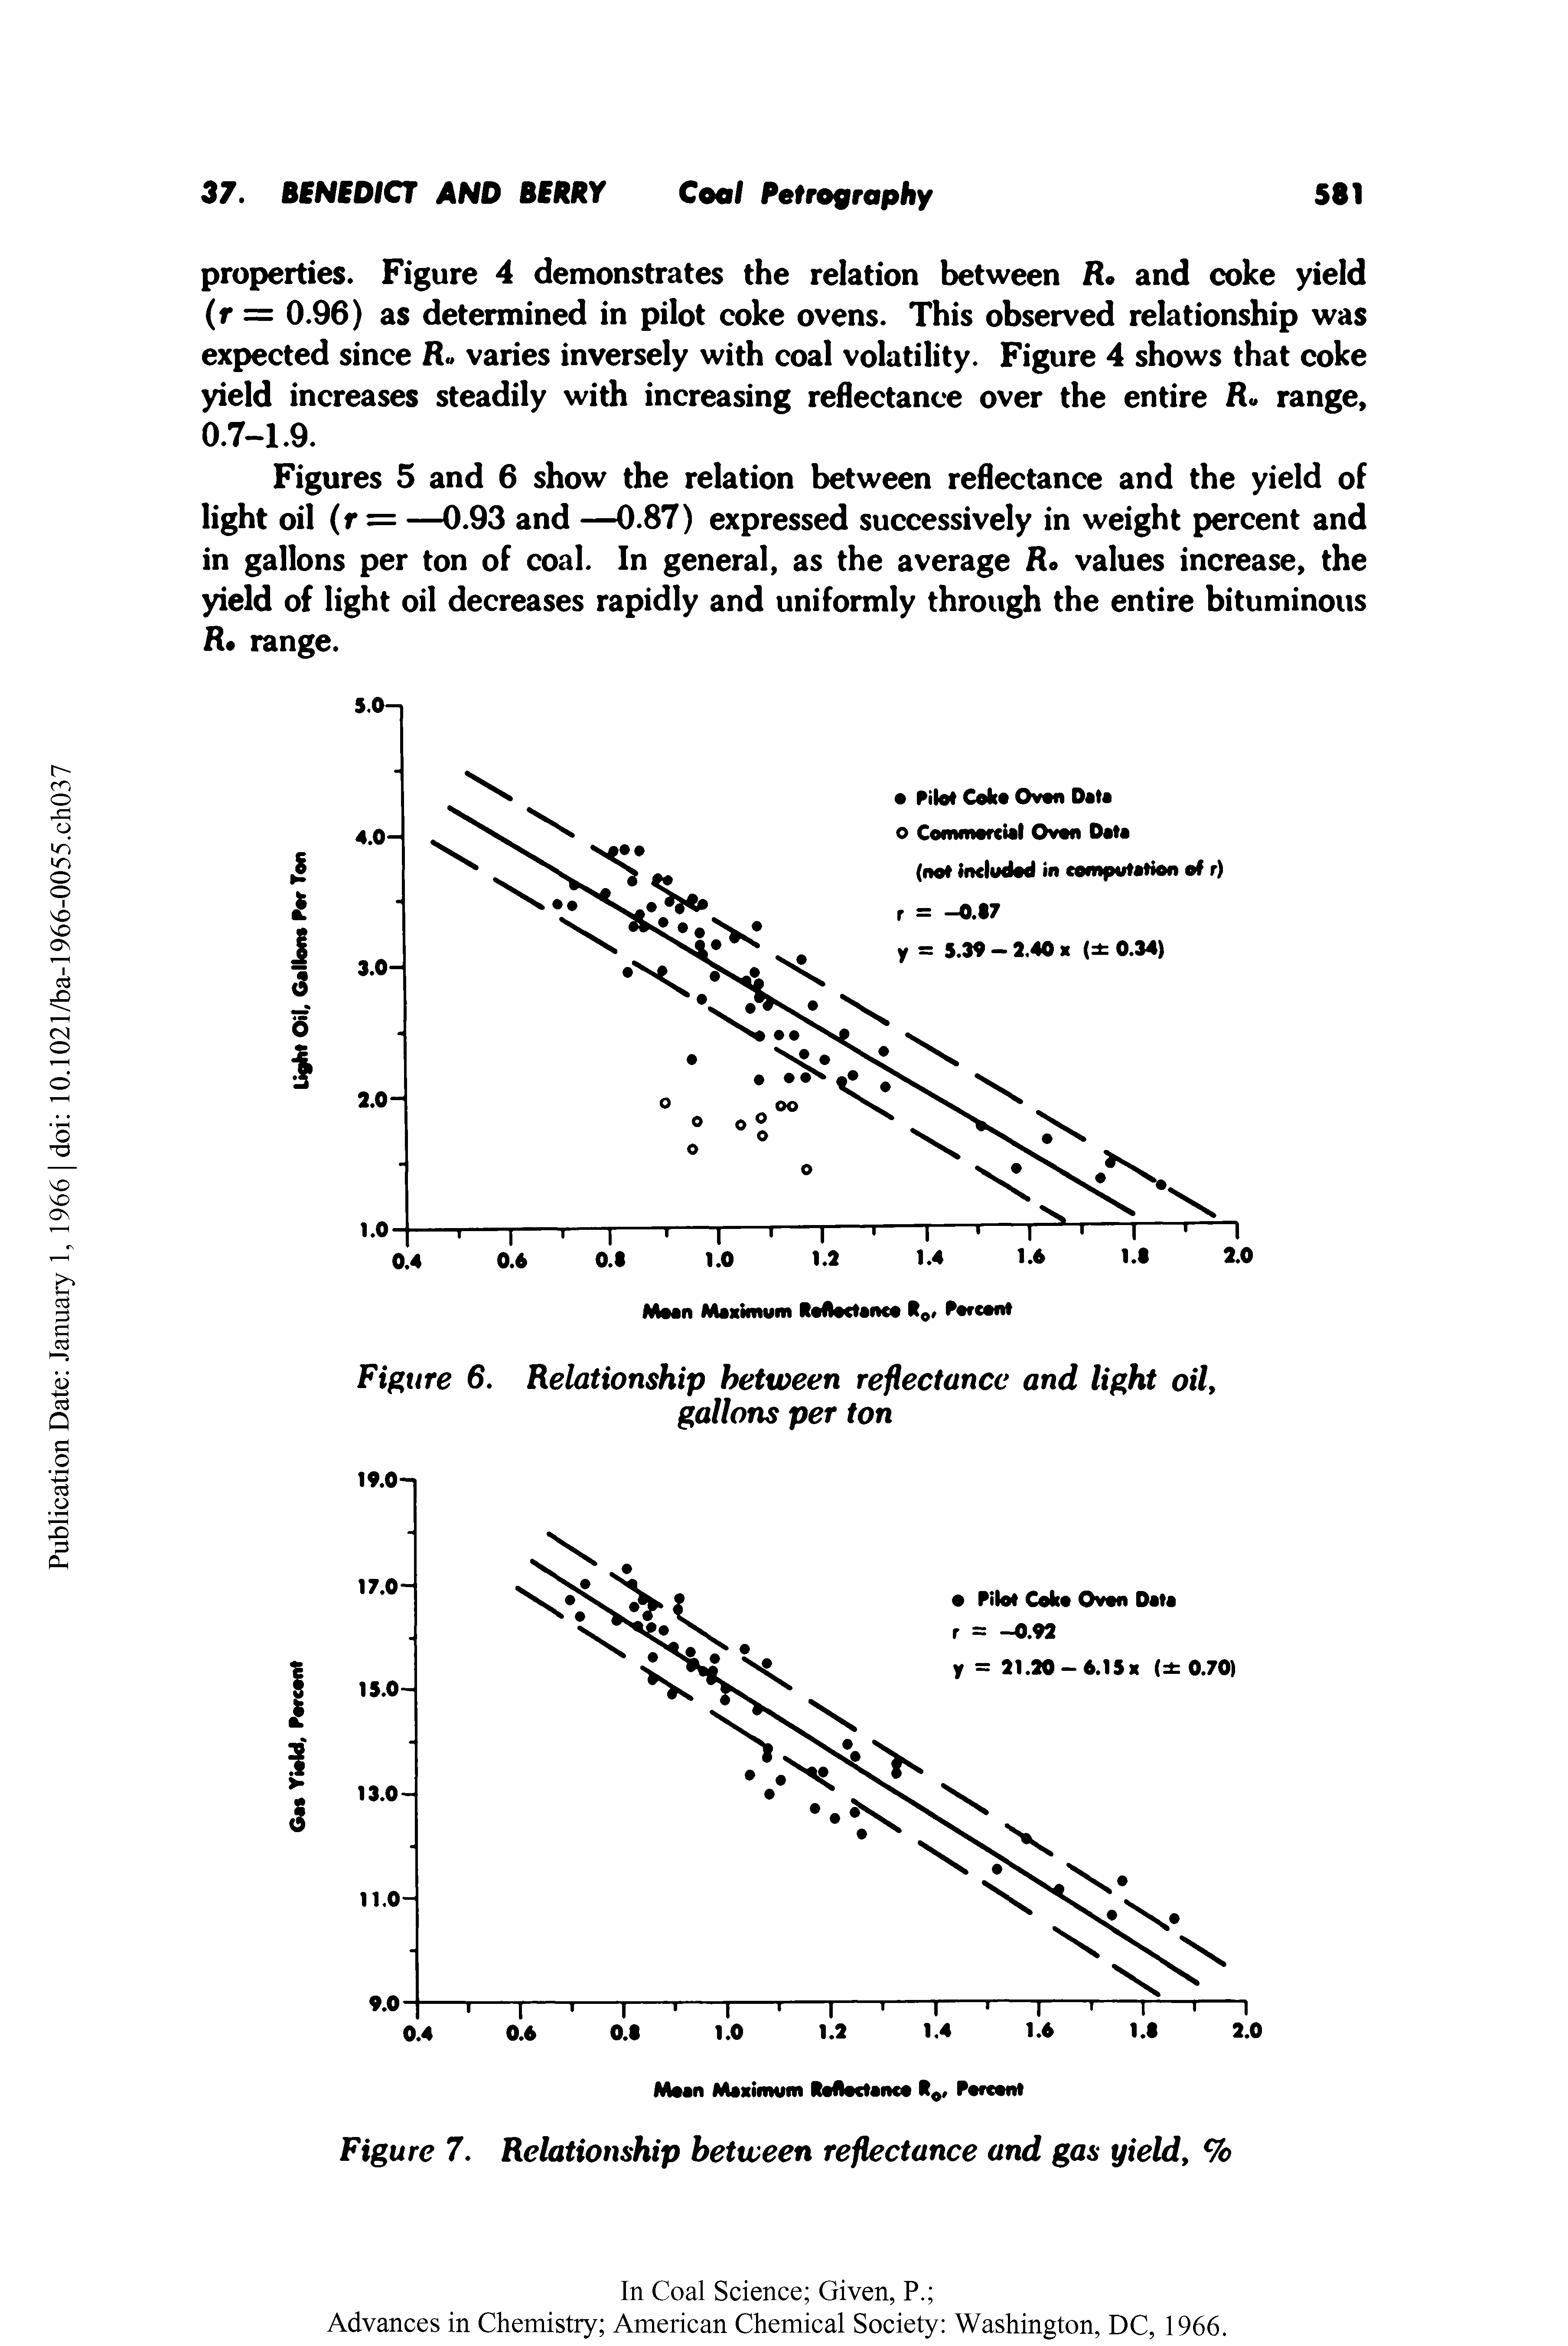 Figures 5 and 6 show the relation between reflectance and the yield of light oil (r = —0.93 and —0.87) expressed successively in weight percent and in gallons per ton of coal. In general, as the average R values increase, the yield of light oil decreases rapidly and uniformly through the entire bituminous R range.